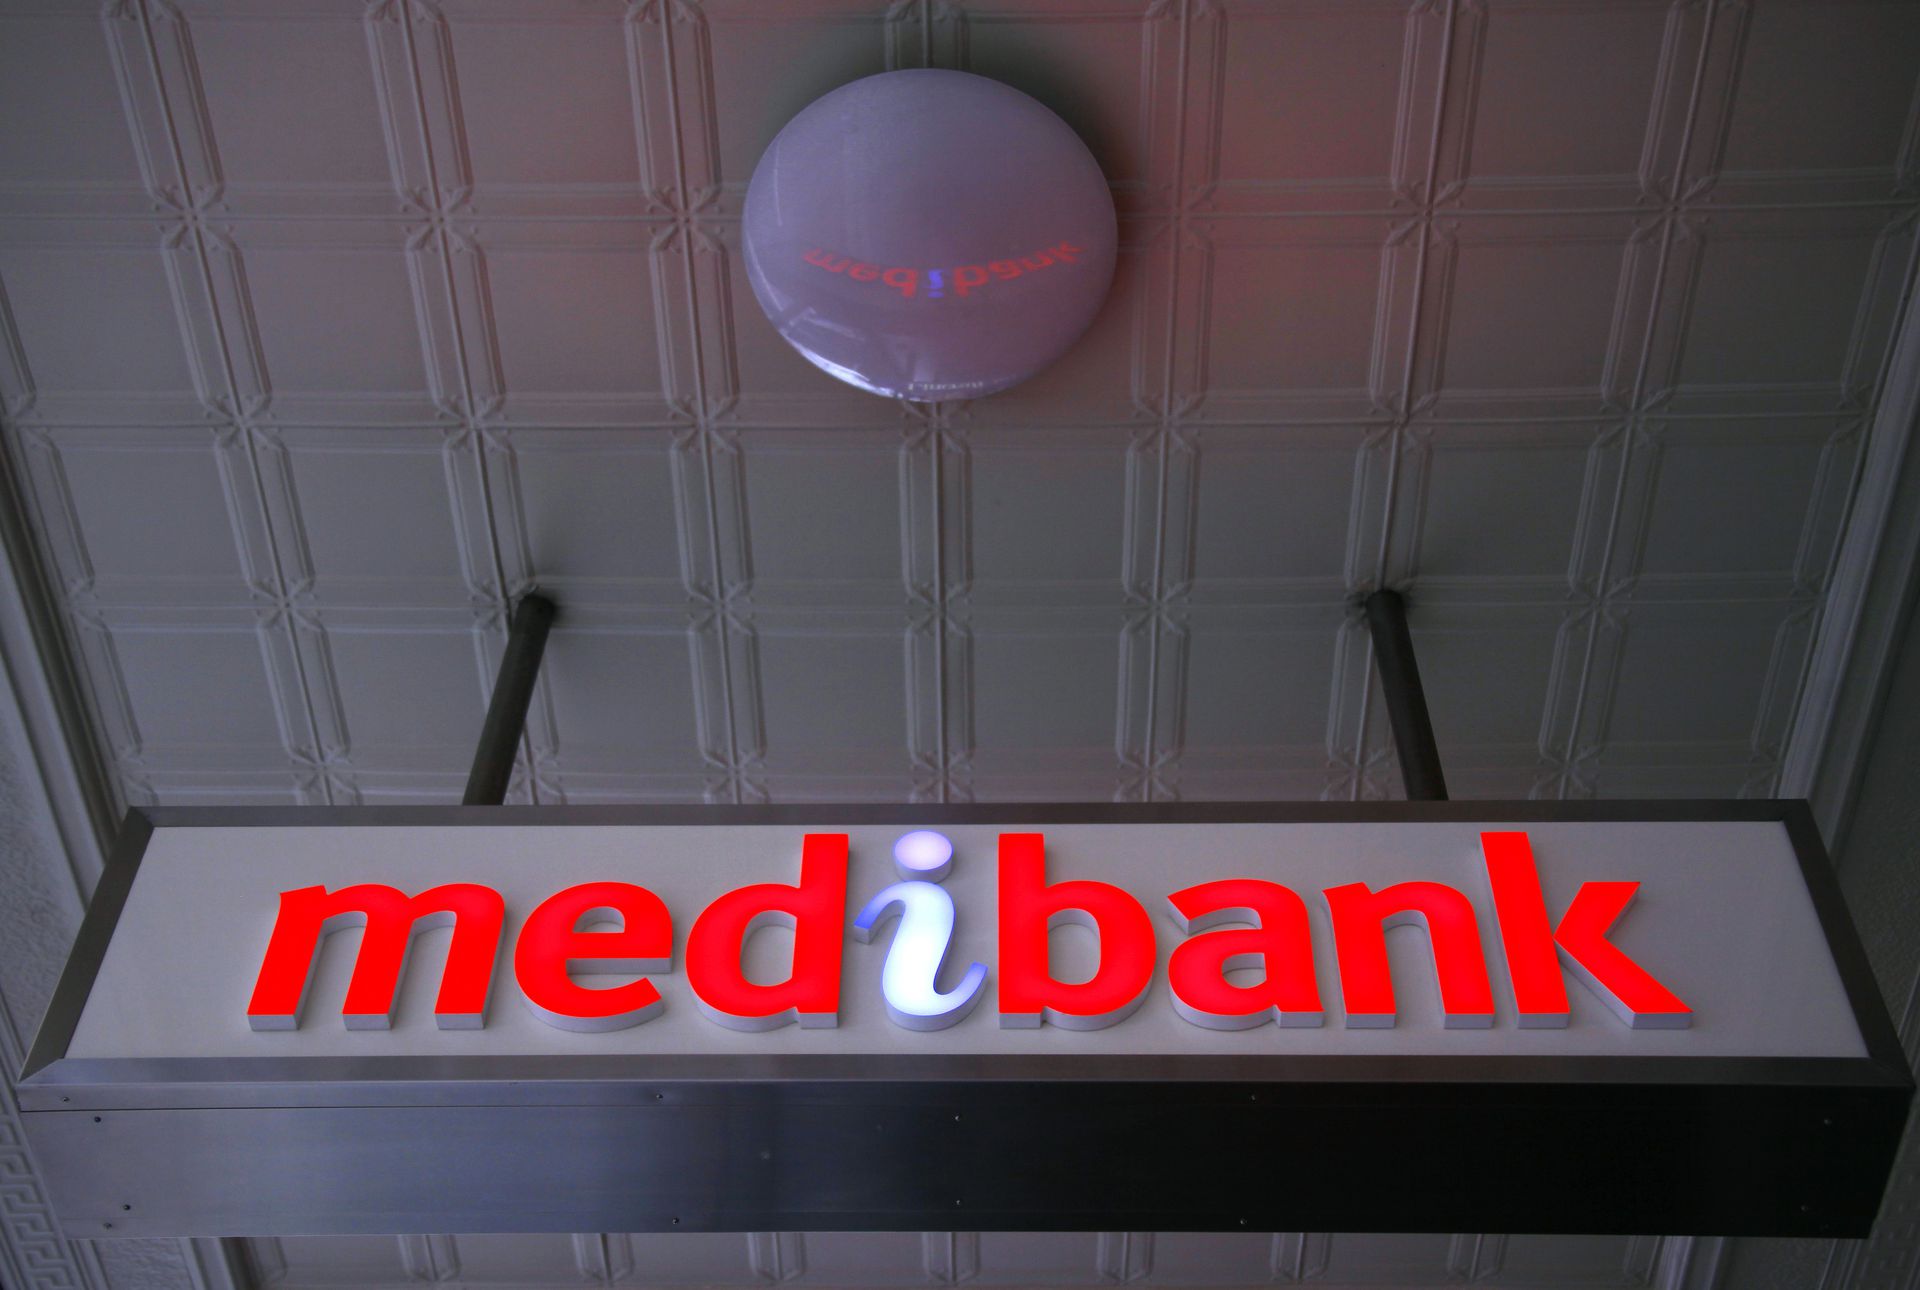 Hackers Claim to Have Access to Data at Australia’s Medibank